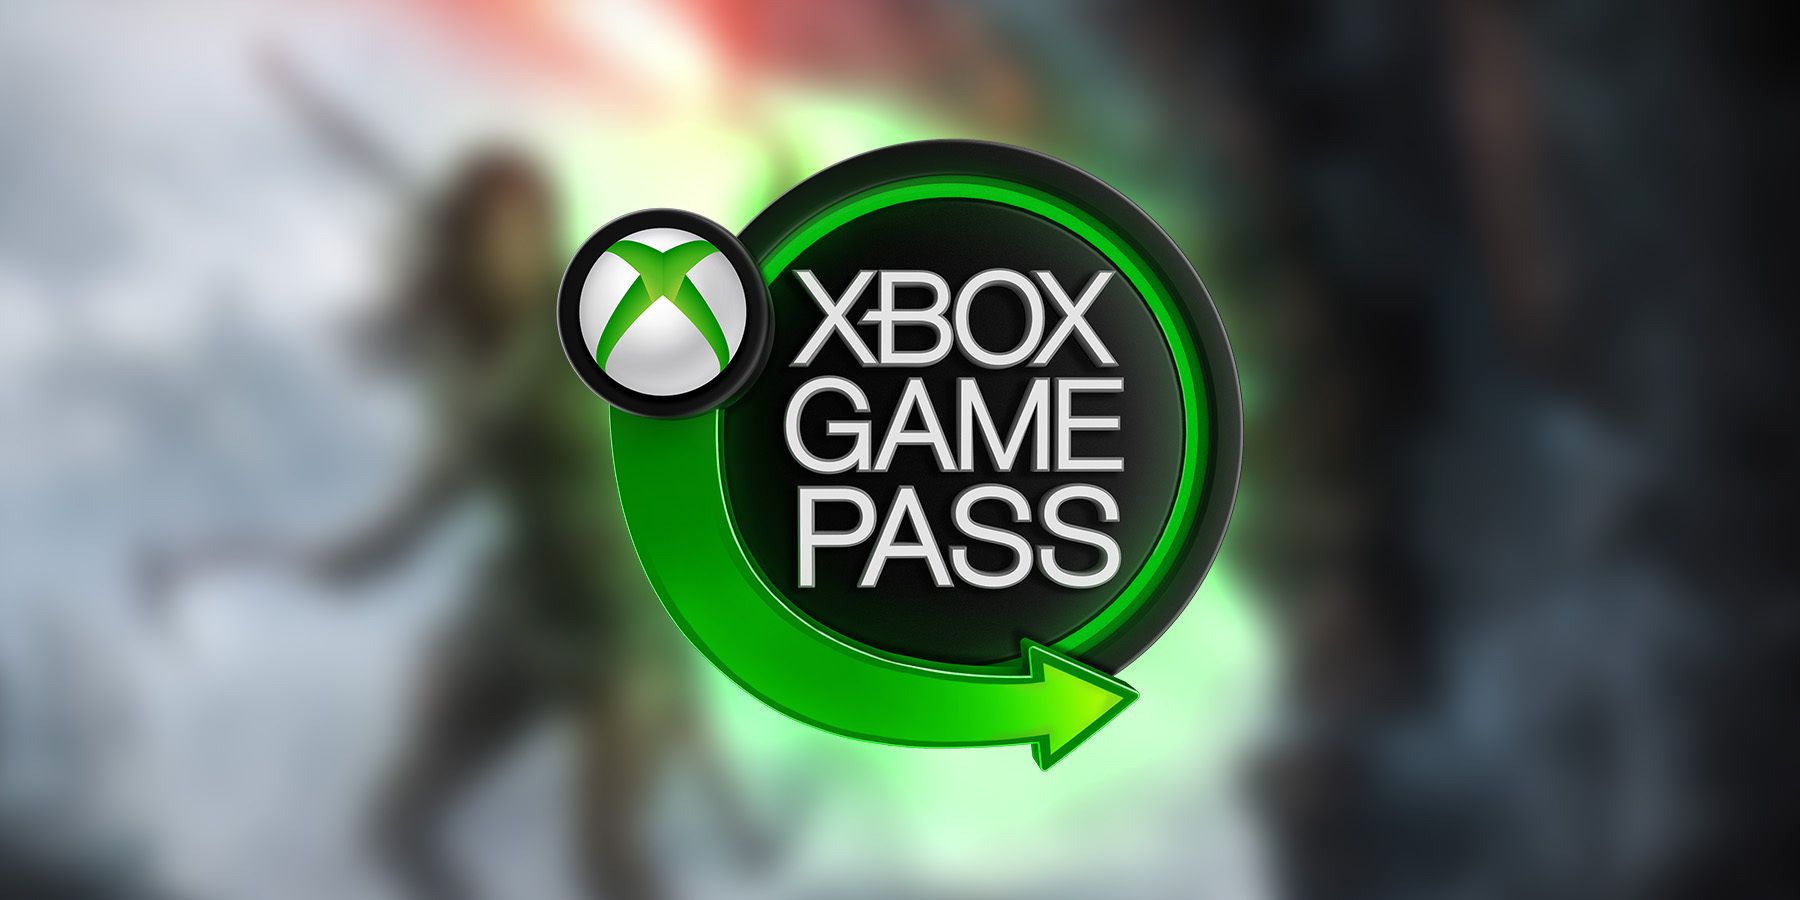 Saber Interactive - Great news for Xbox Game Pass owners! World War Z is  coming to Xbox Game Pass for PC on September 3. See you in the game!